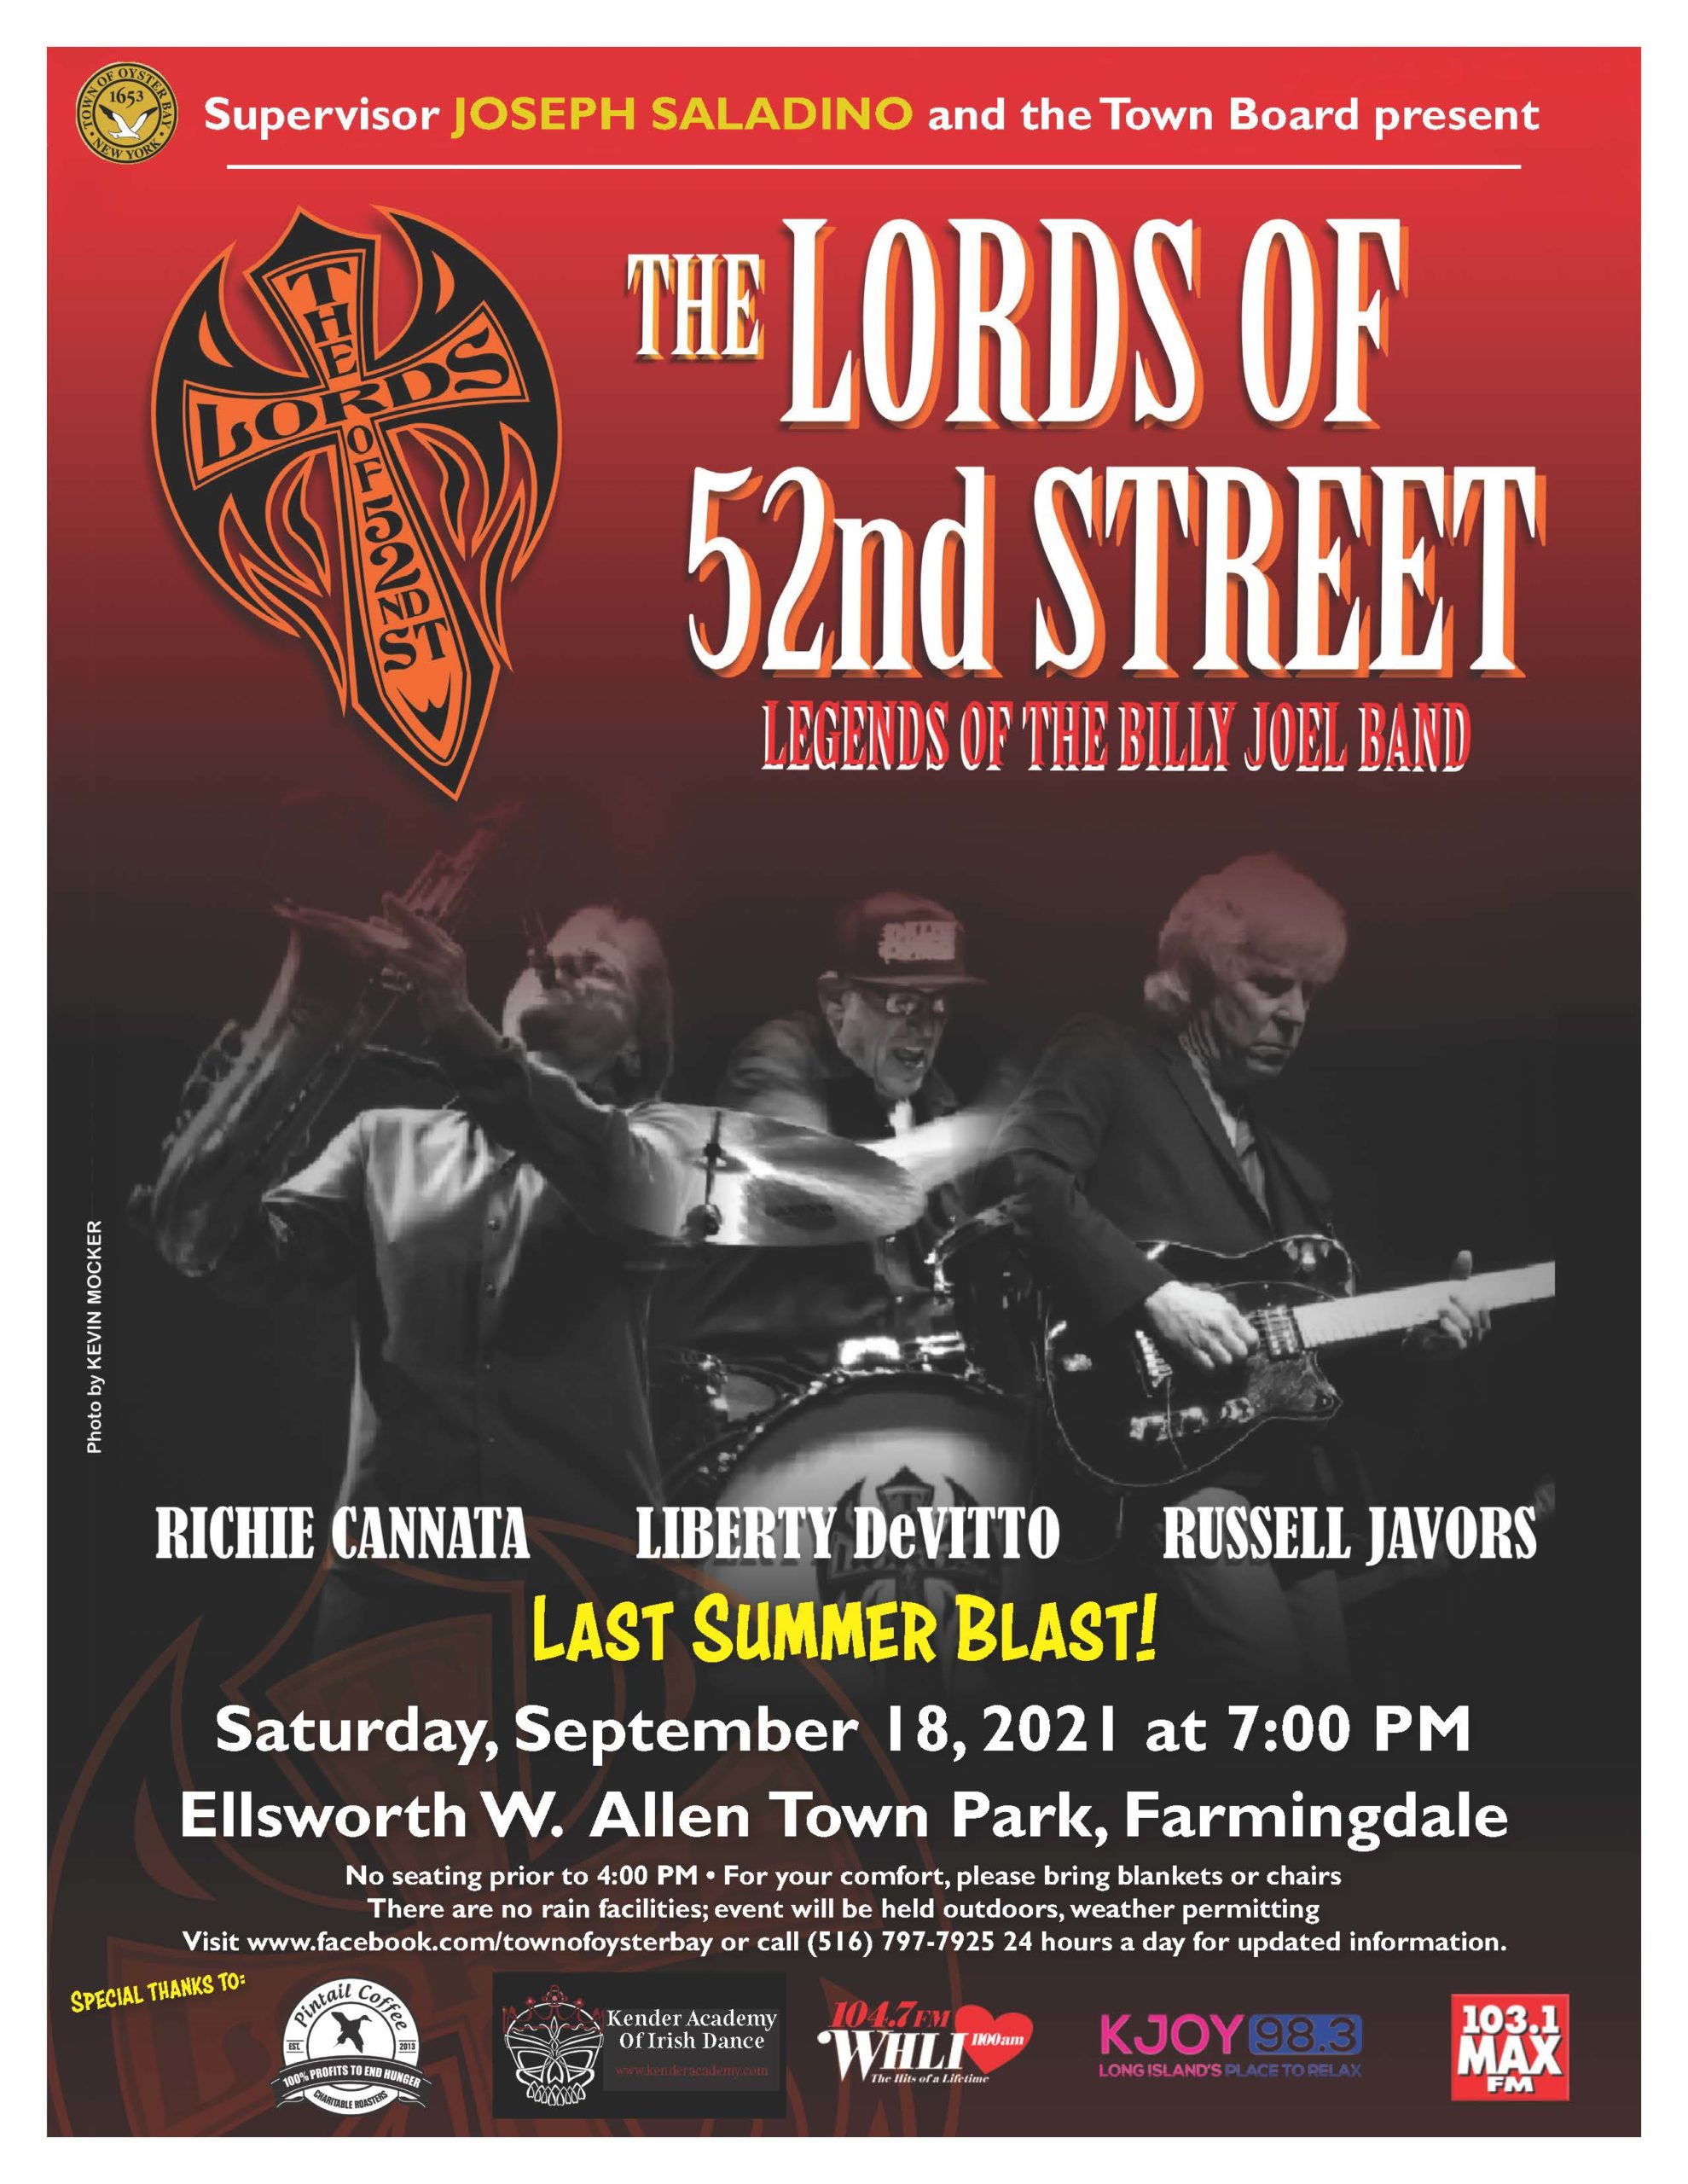 One Last Summer Blast' Concert with The Lords of 52nd Street on